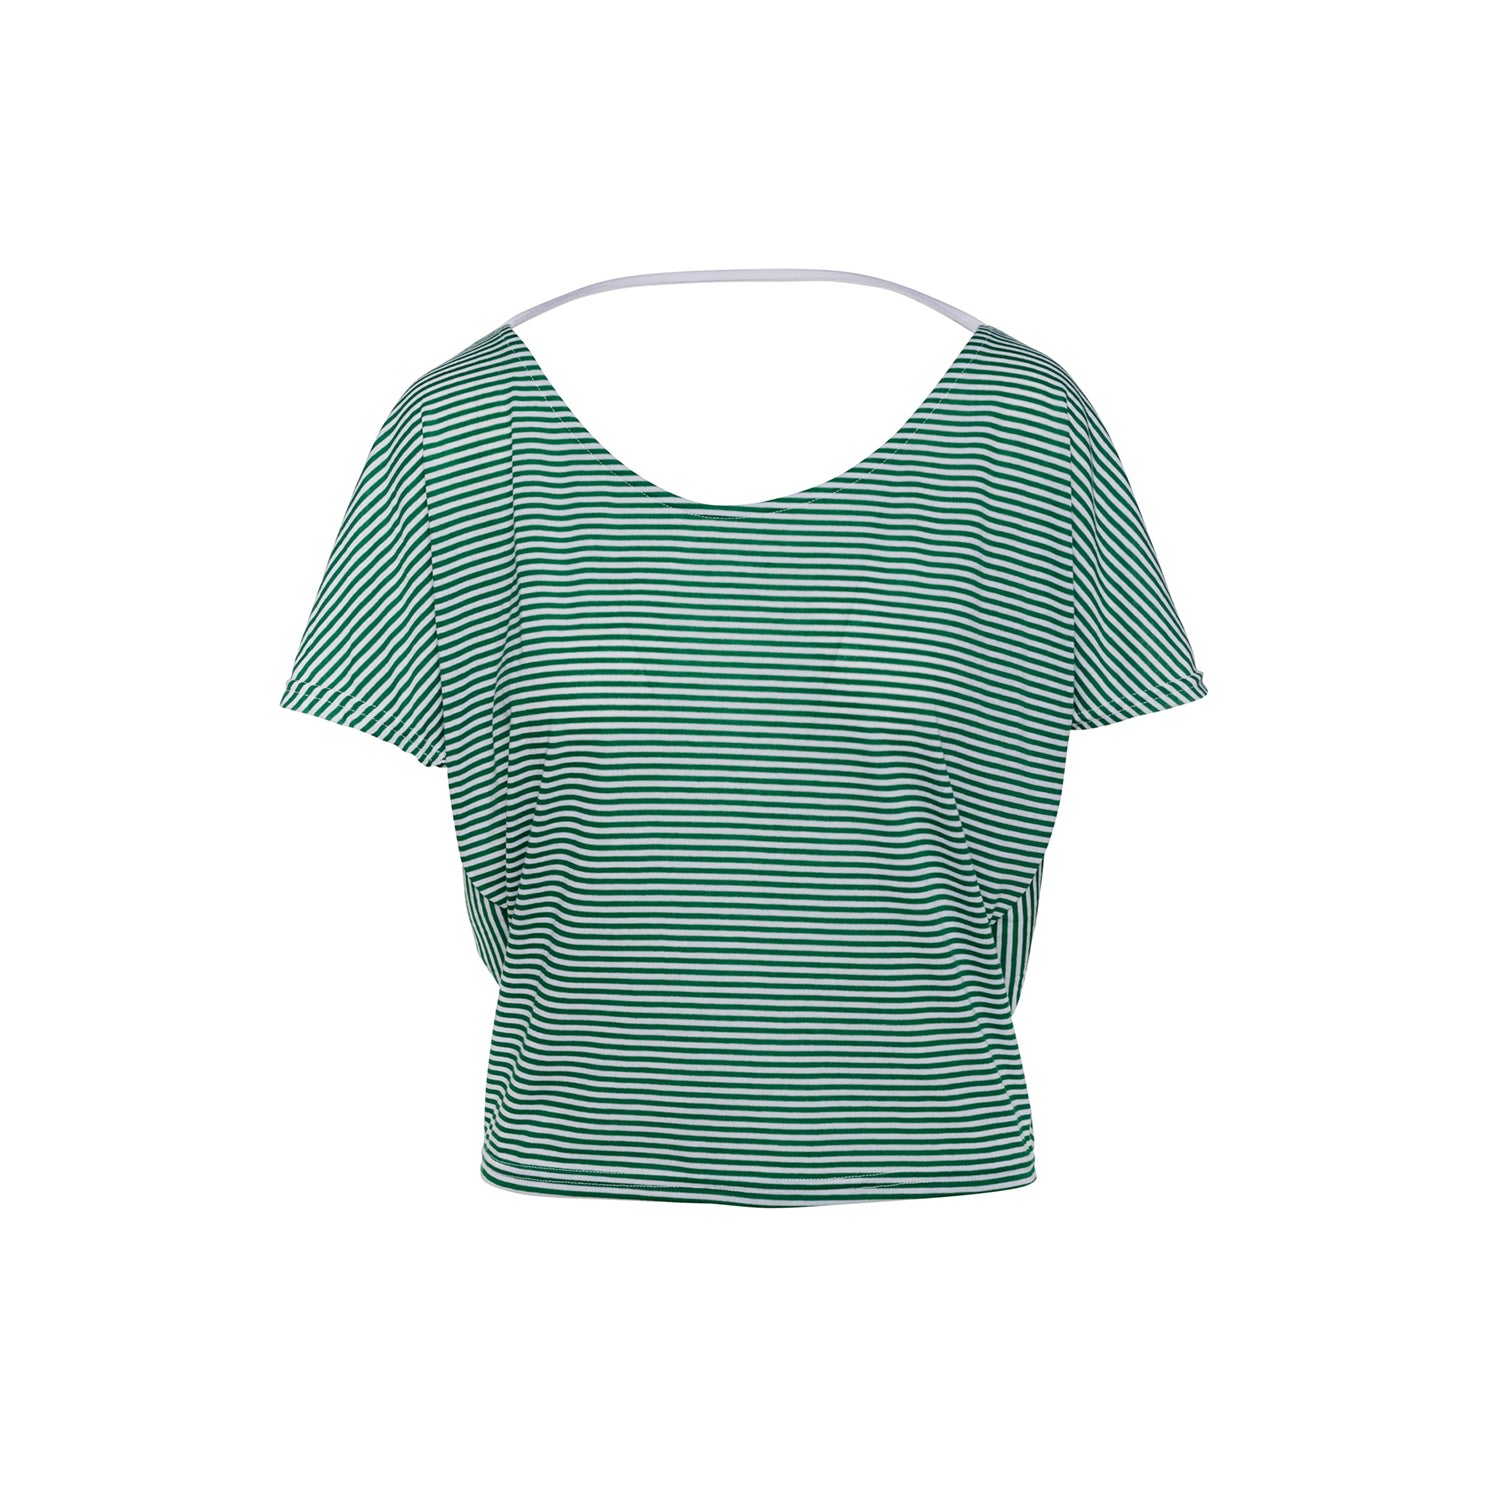 Women’s Green Striped Batwing Top Small Conquista